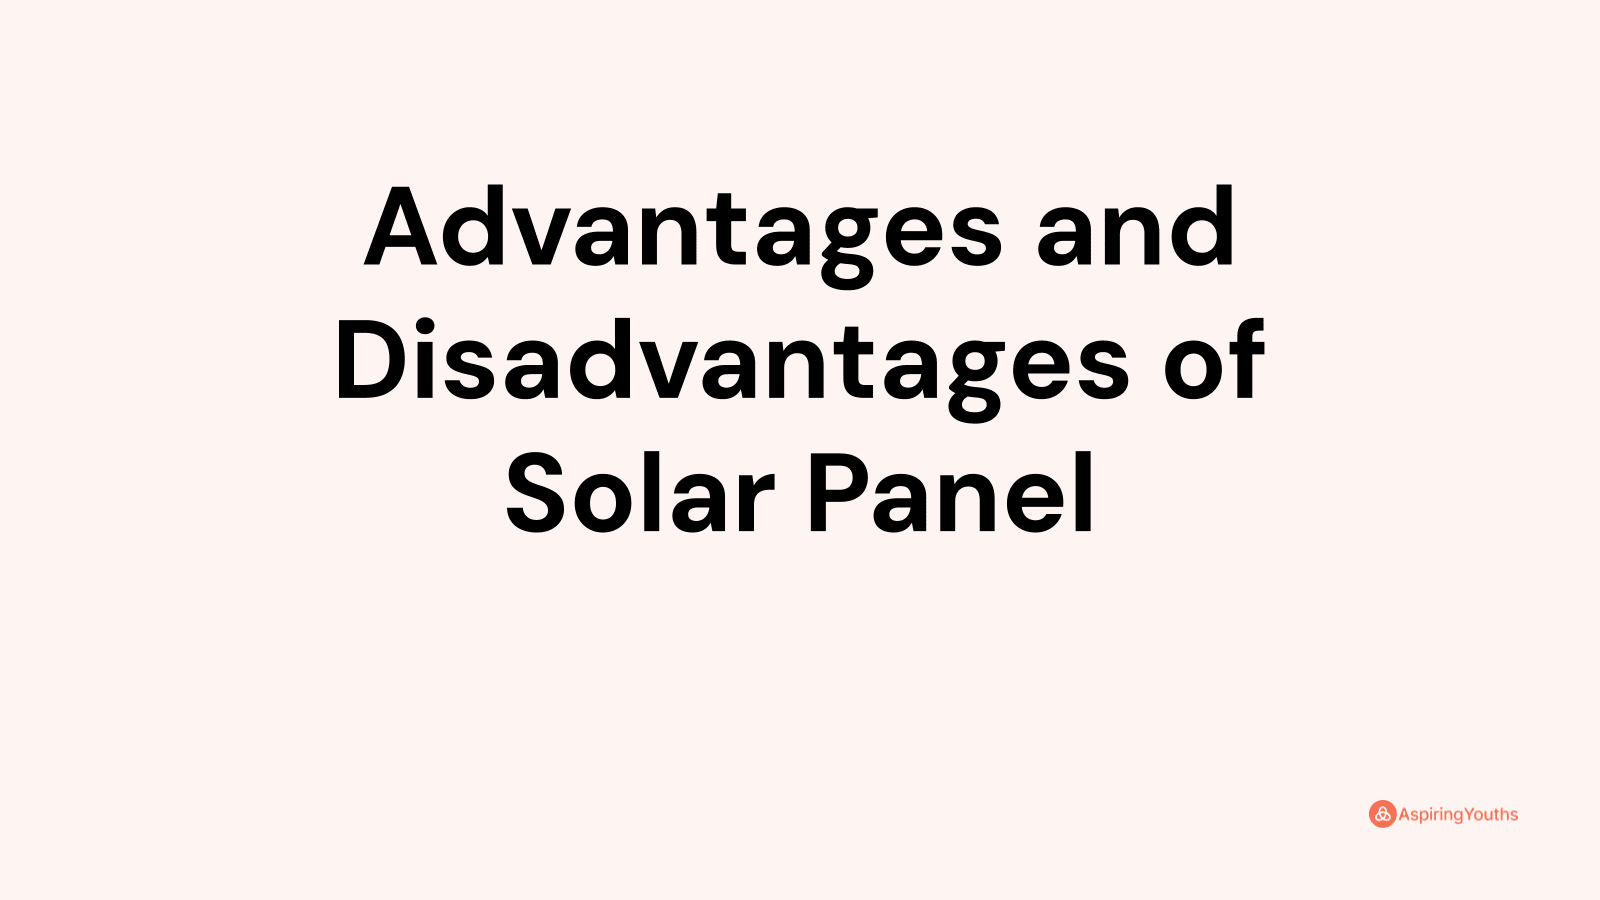 Advantages and disadvantages of Solar Panel